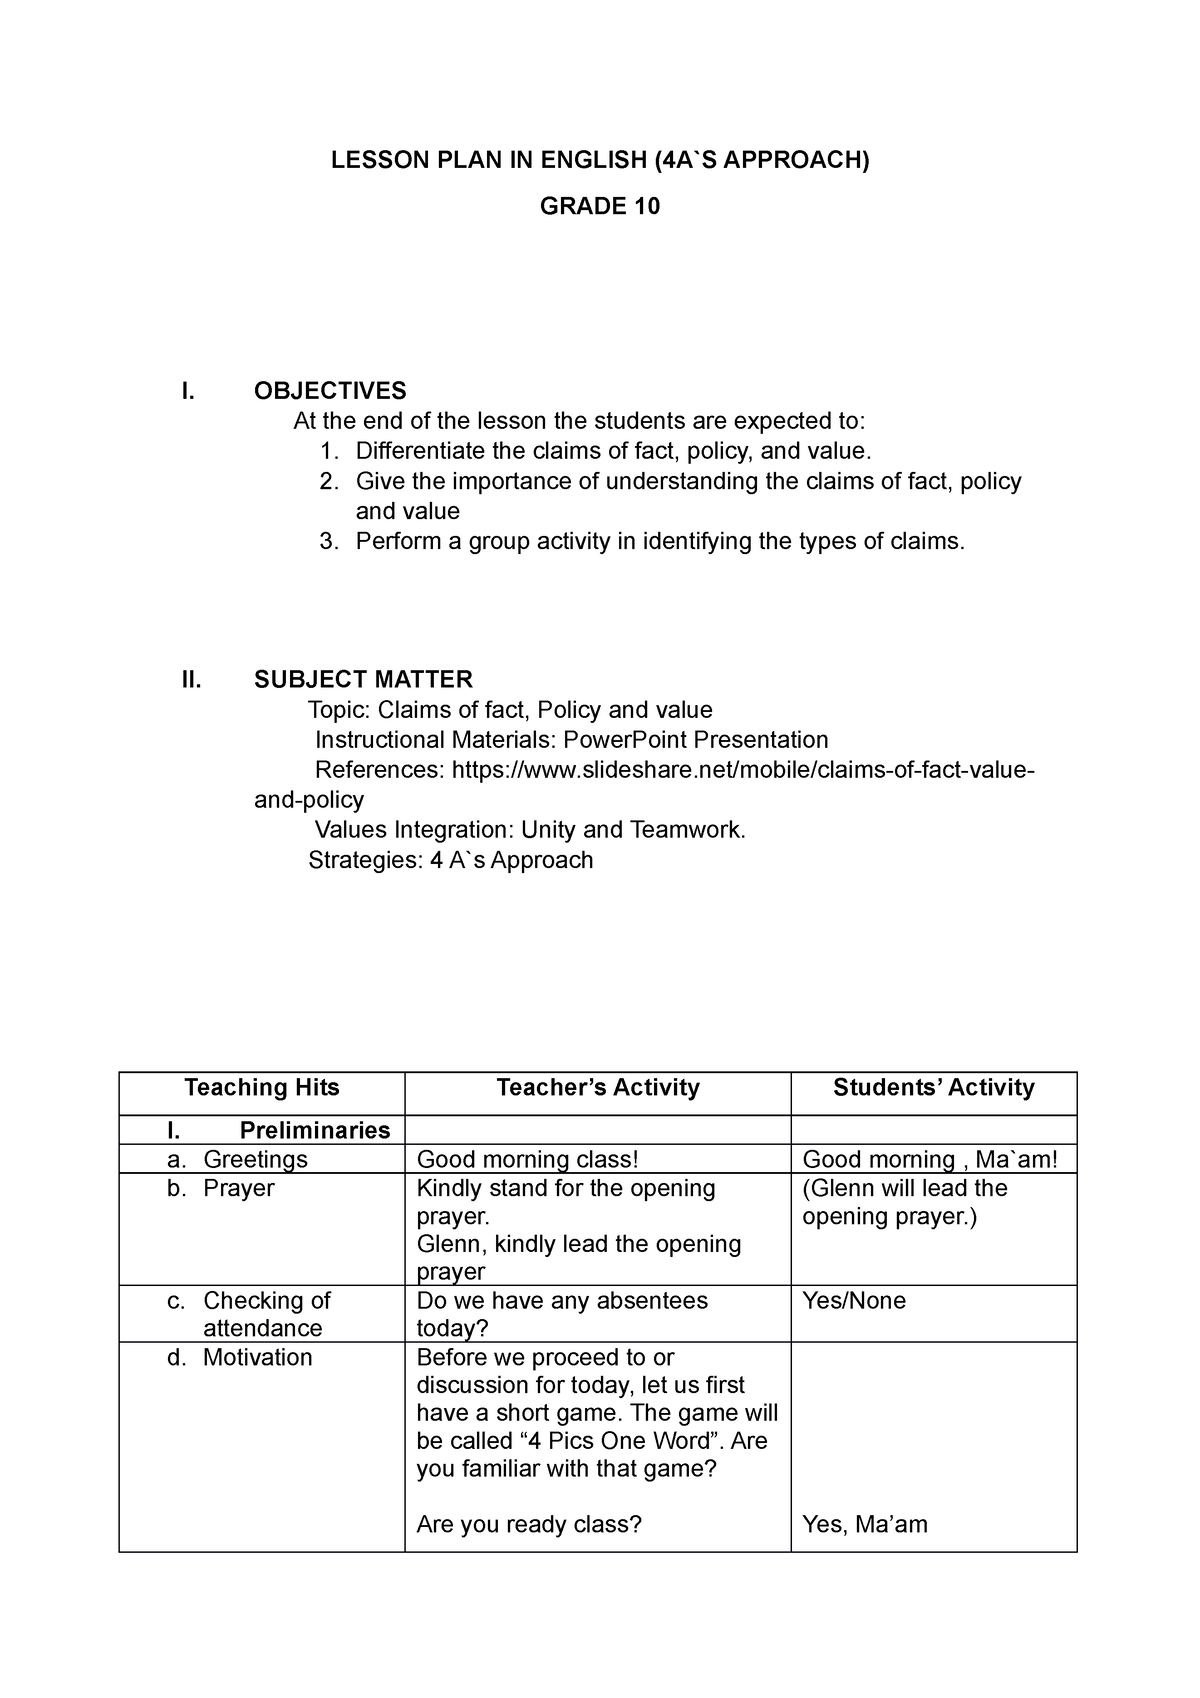 lesson-plan-in-english-grade-10-lesson-plan-in-english-4a-s-approach